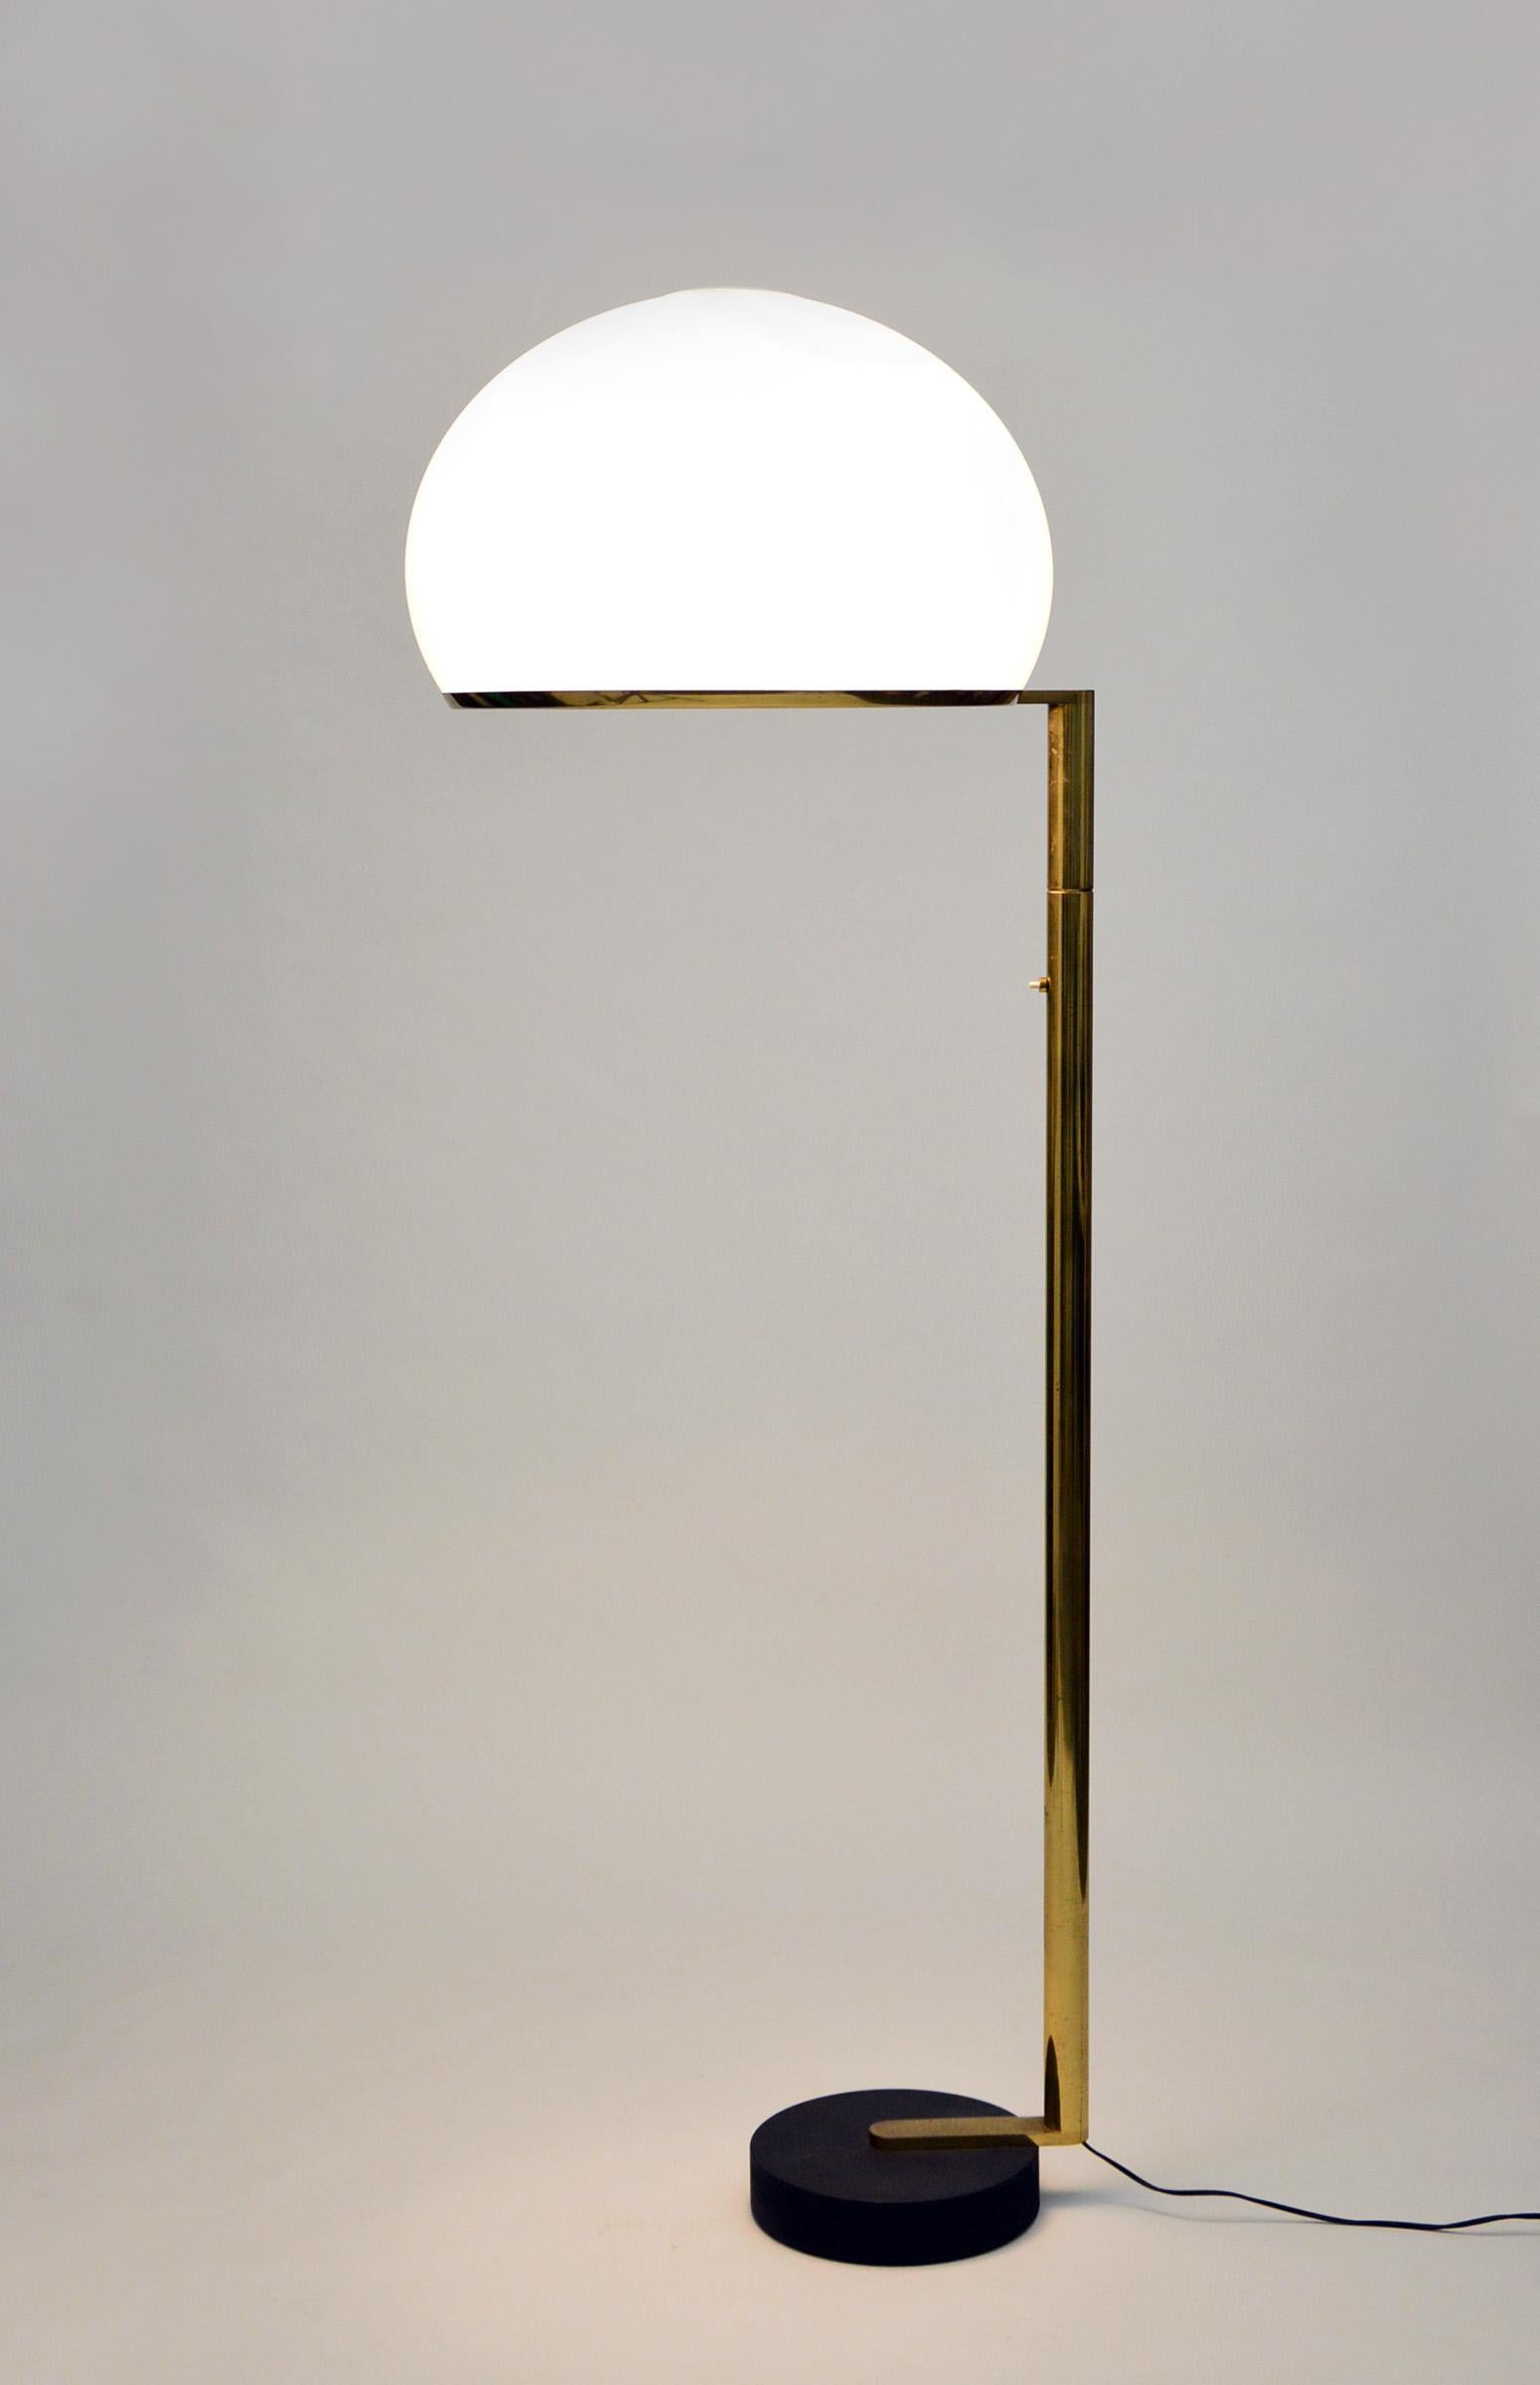 The floor lamp consists of a moulded opal perspex diffuser, a brass stem and a black cast iron base; it can be used both as a reading lamp and, thanks to the opal diffuser, as an ambient light.
The lamp was designed by the